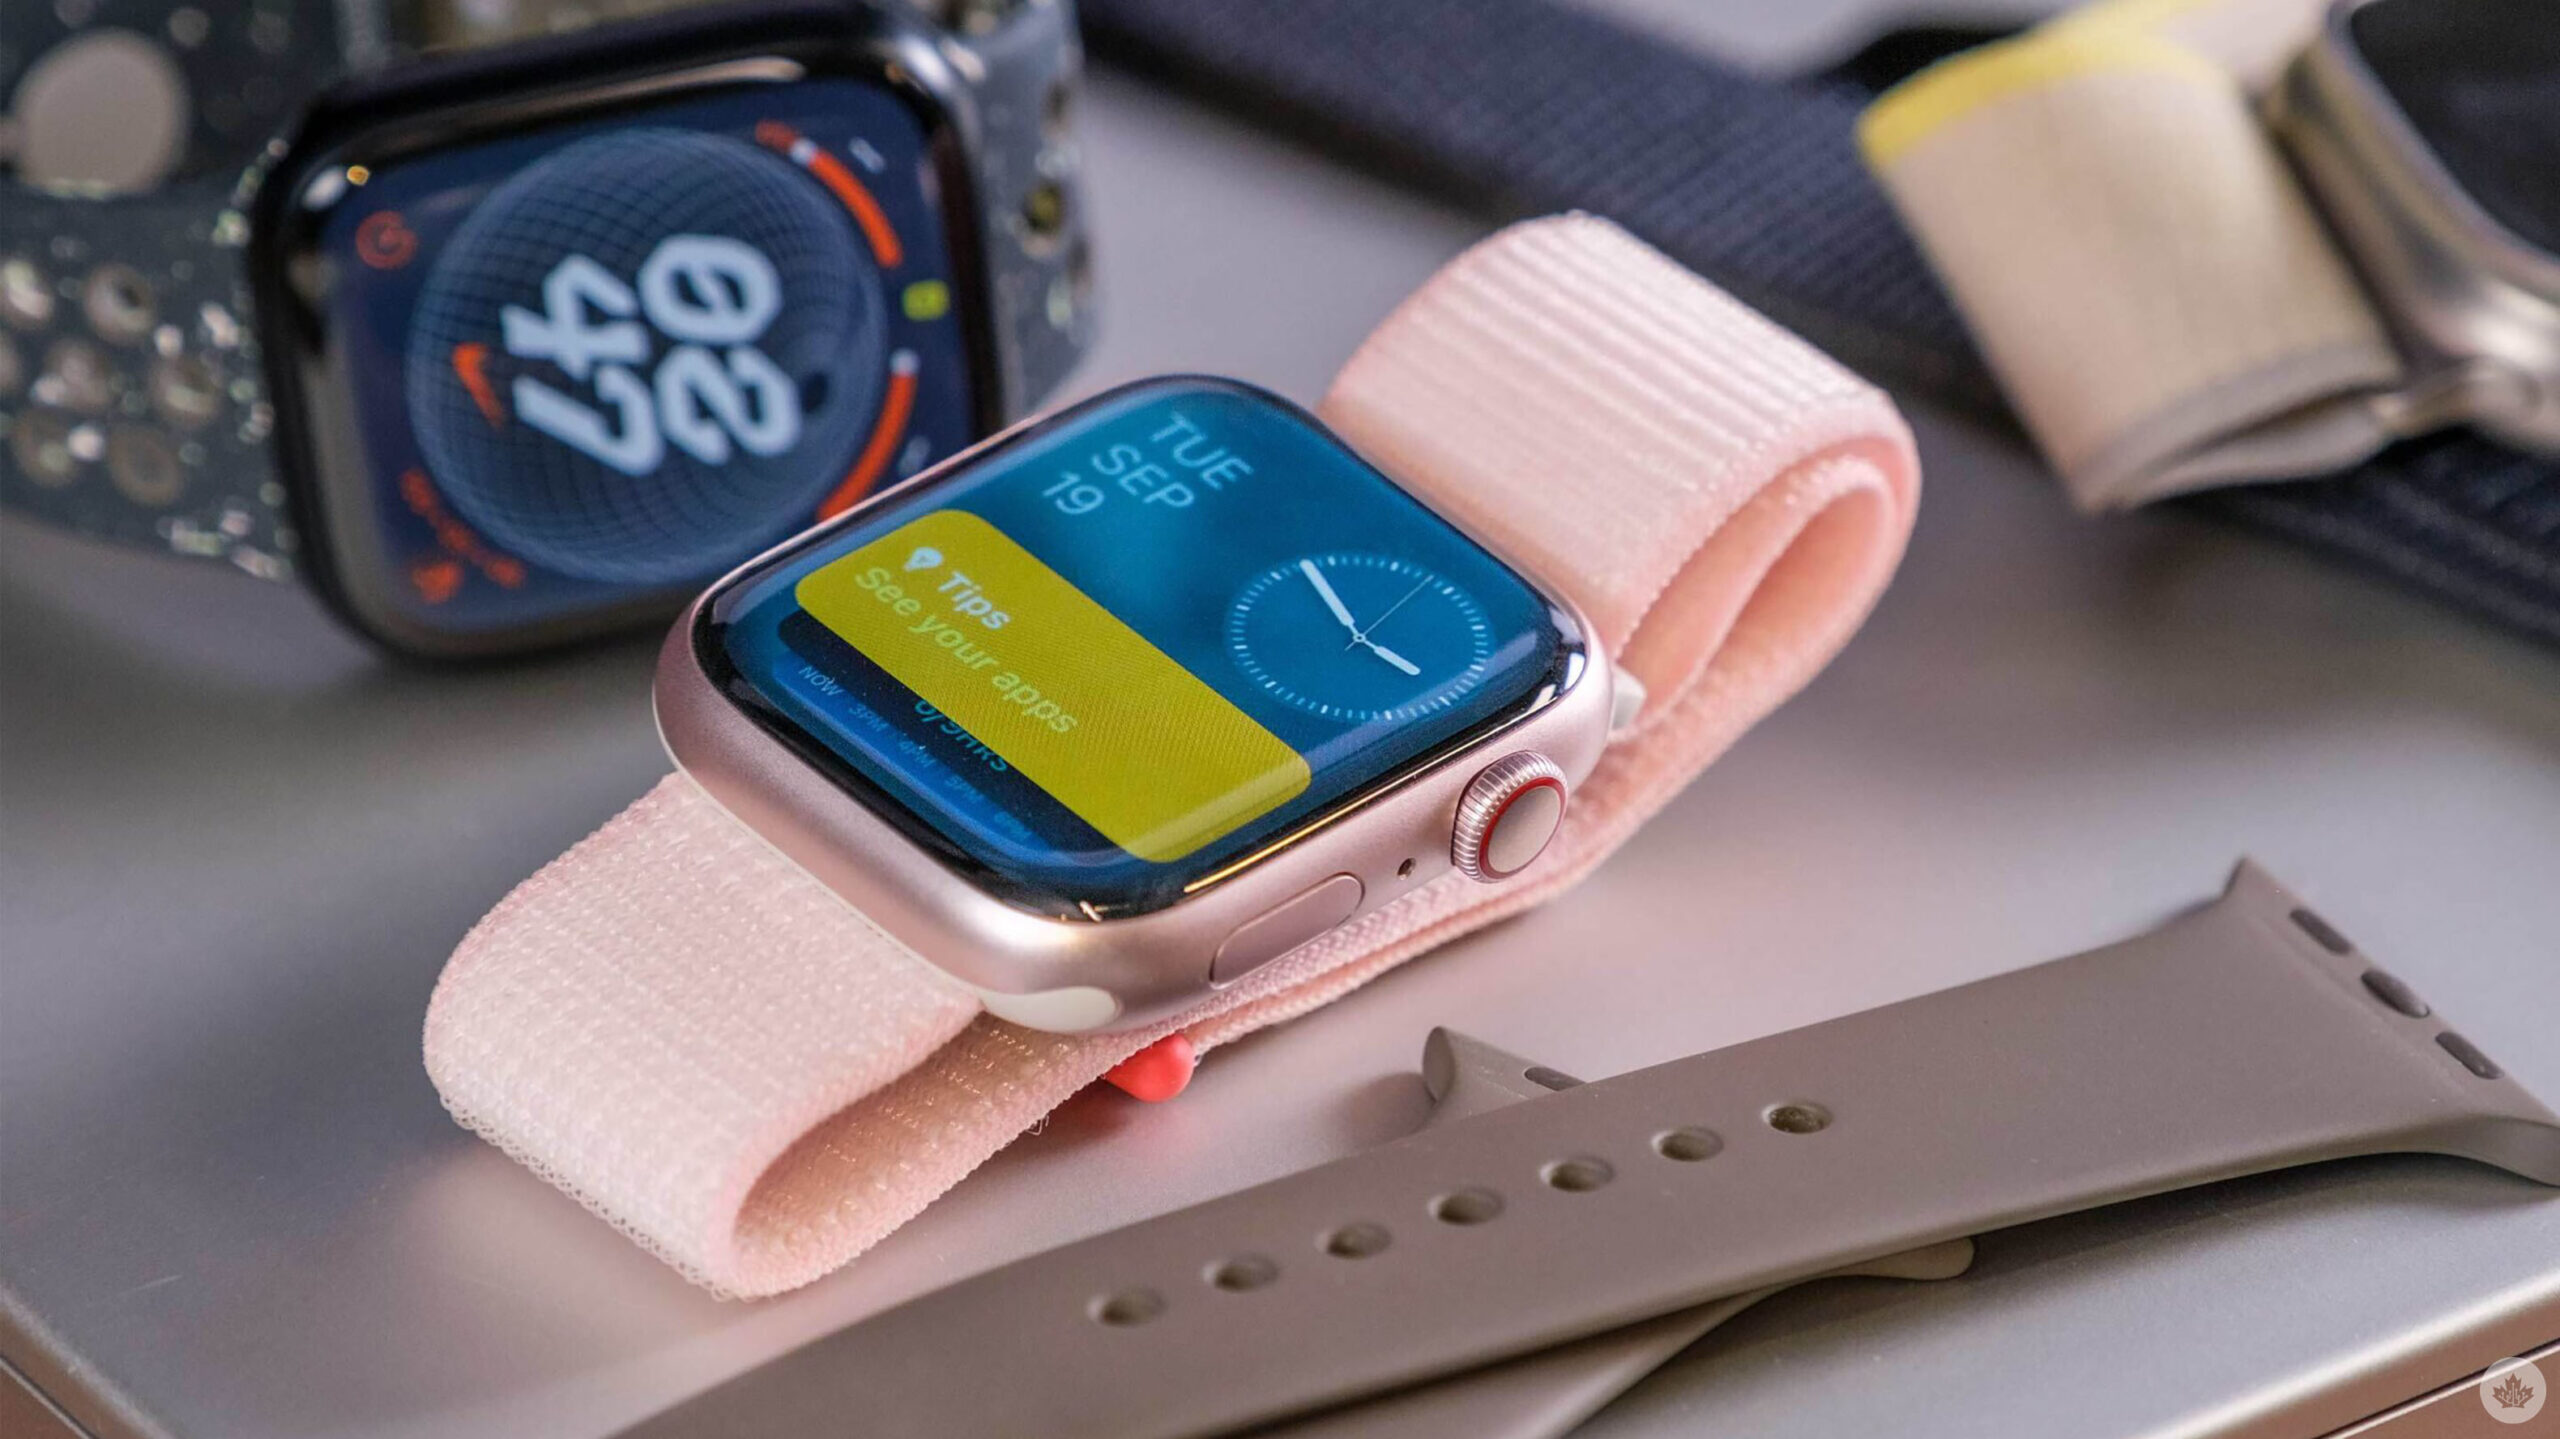 Apple Watch X with blood pressure monitor looks like a big winner - analyst